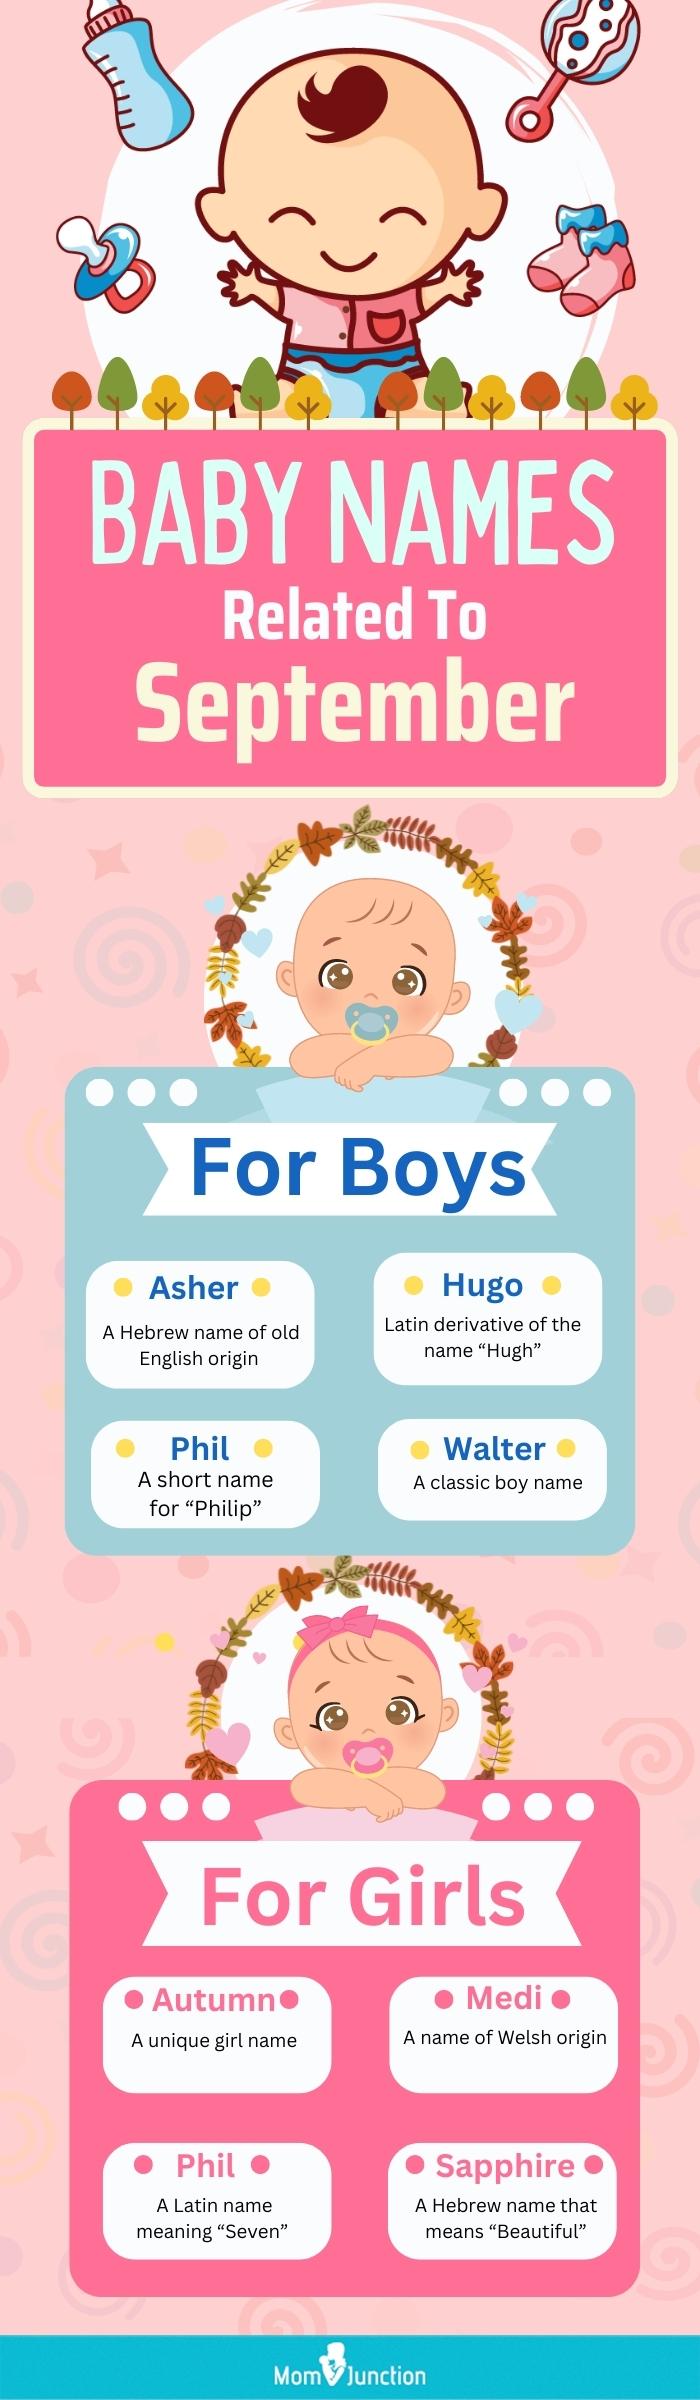 baby names related to september [infographic]